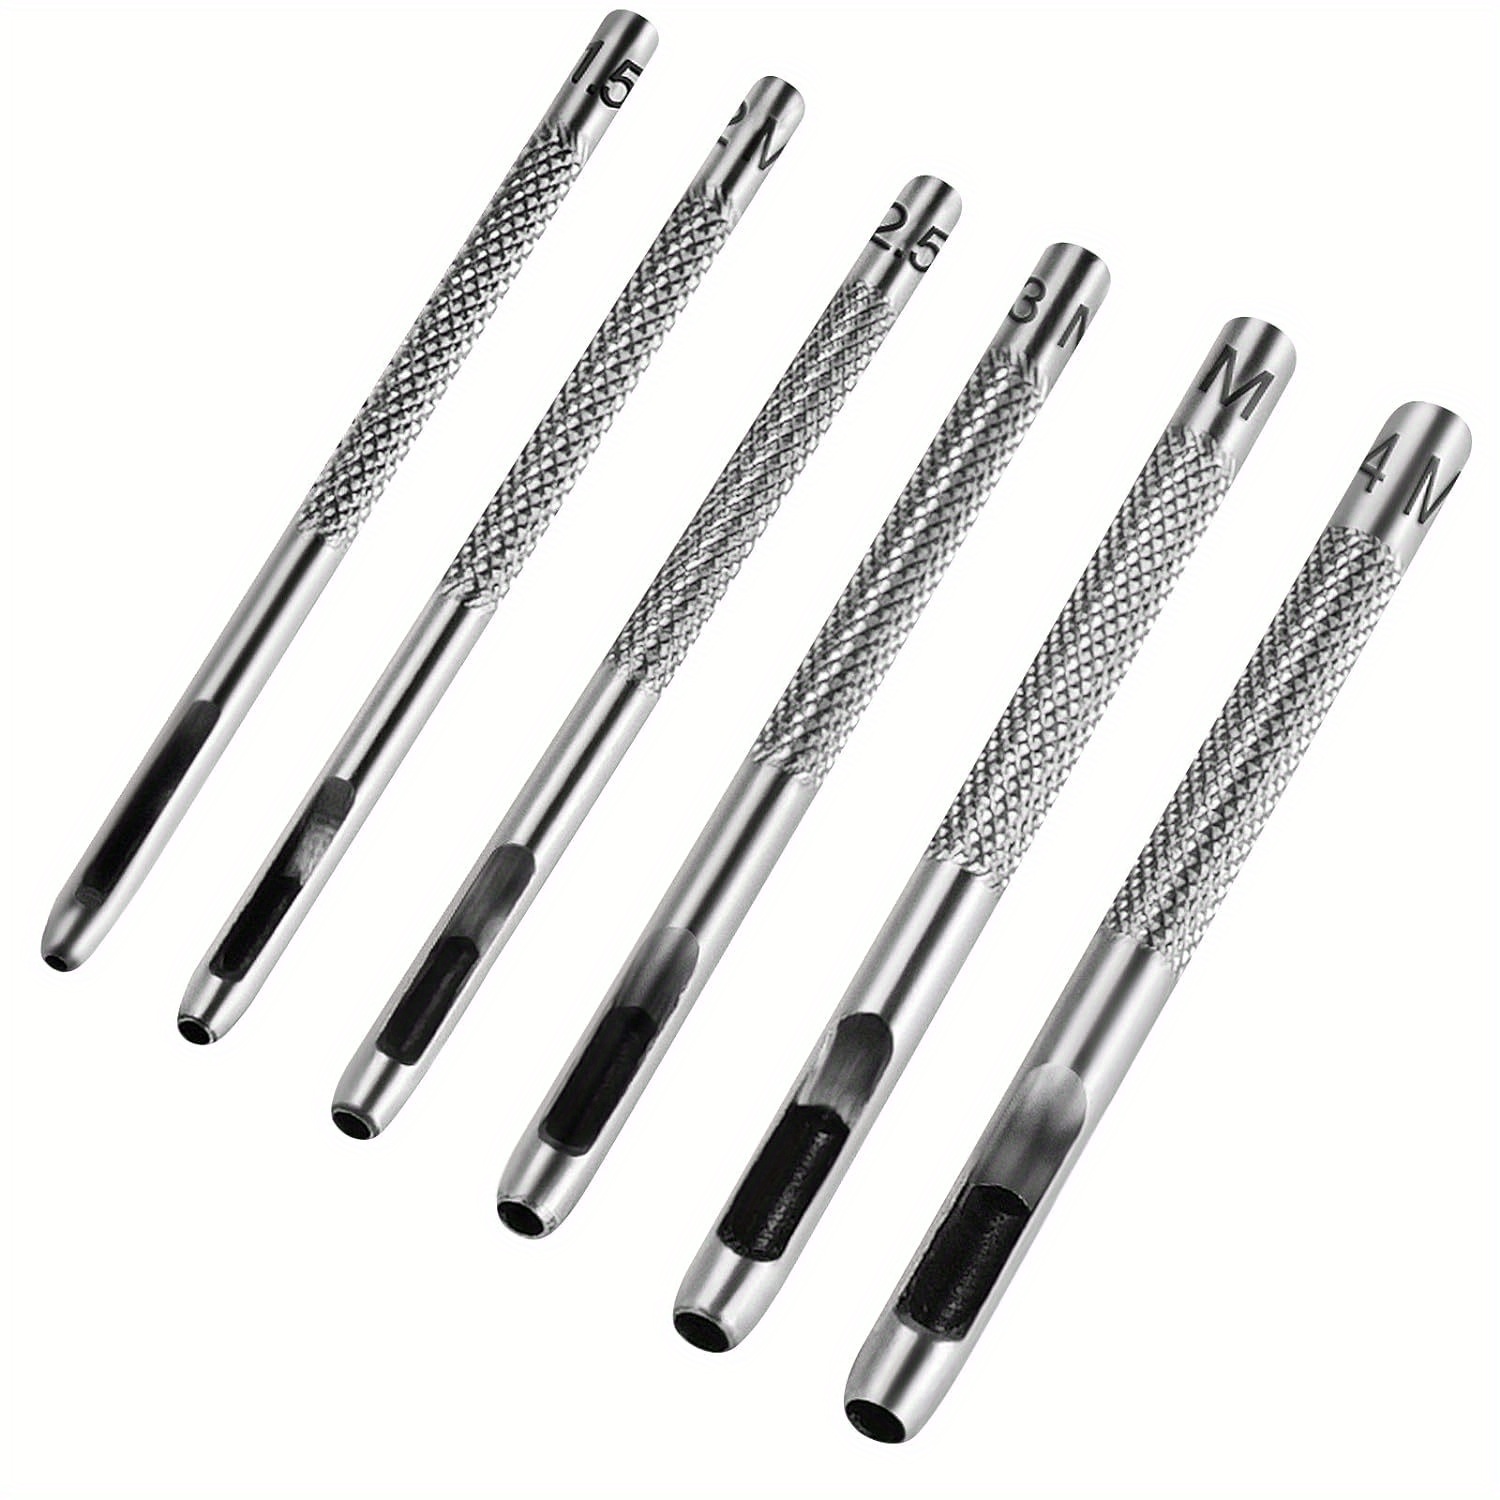 6pcs Hollow Punch Set Hole Cutting Leather Gaskets Tools 3/4/5/6/7/8/mm, Size: 6 Sizes, Silver